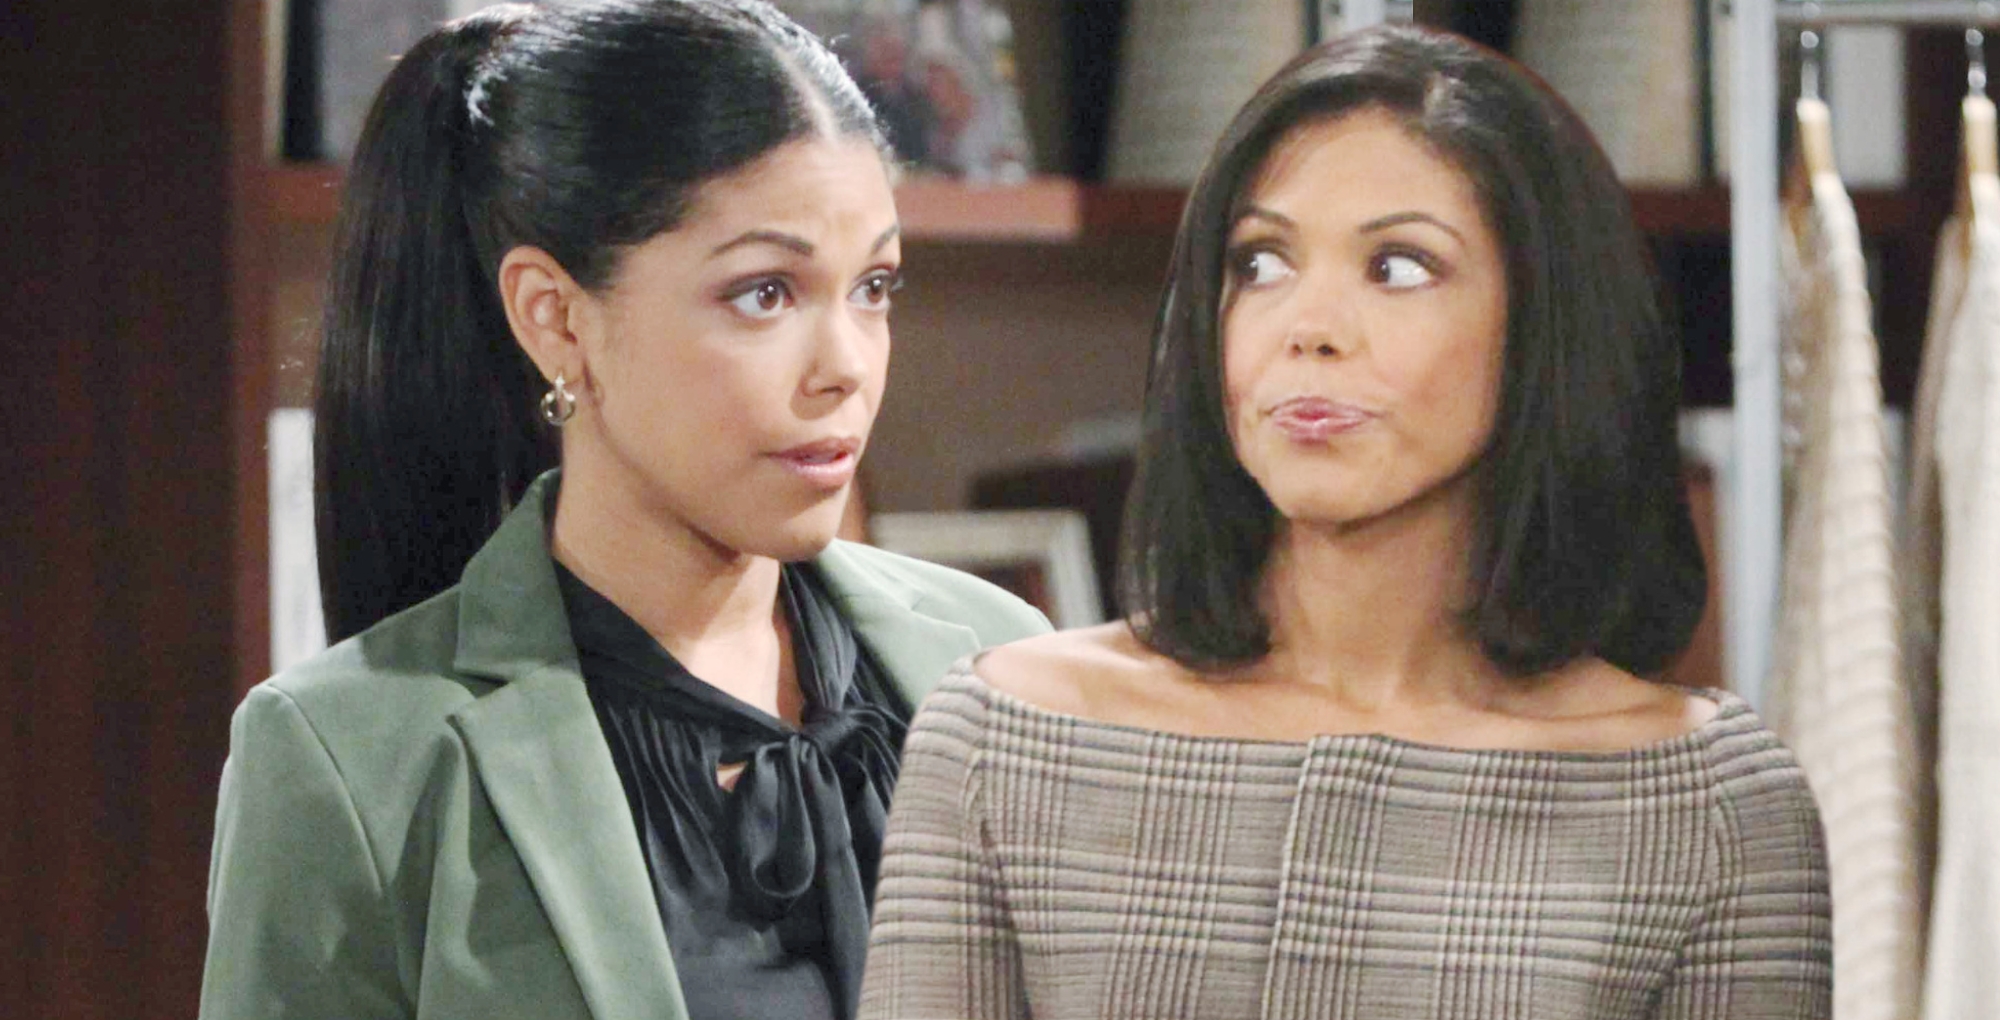 maya avant played by karla mosley has been away from bold and the beautiful for too long.